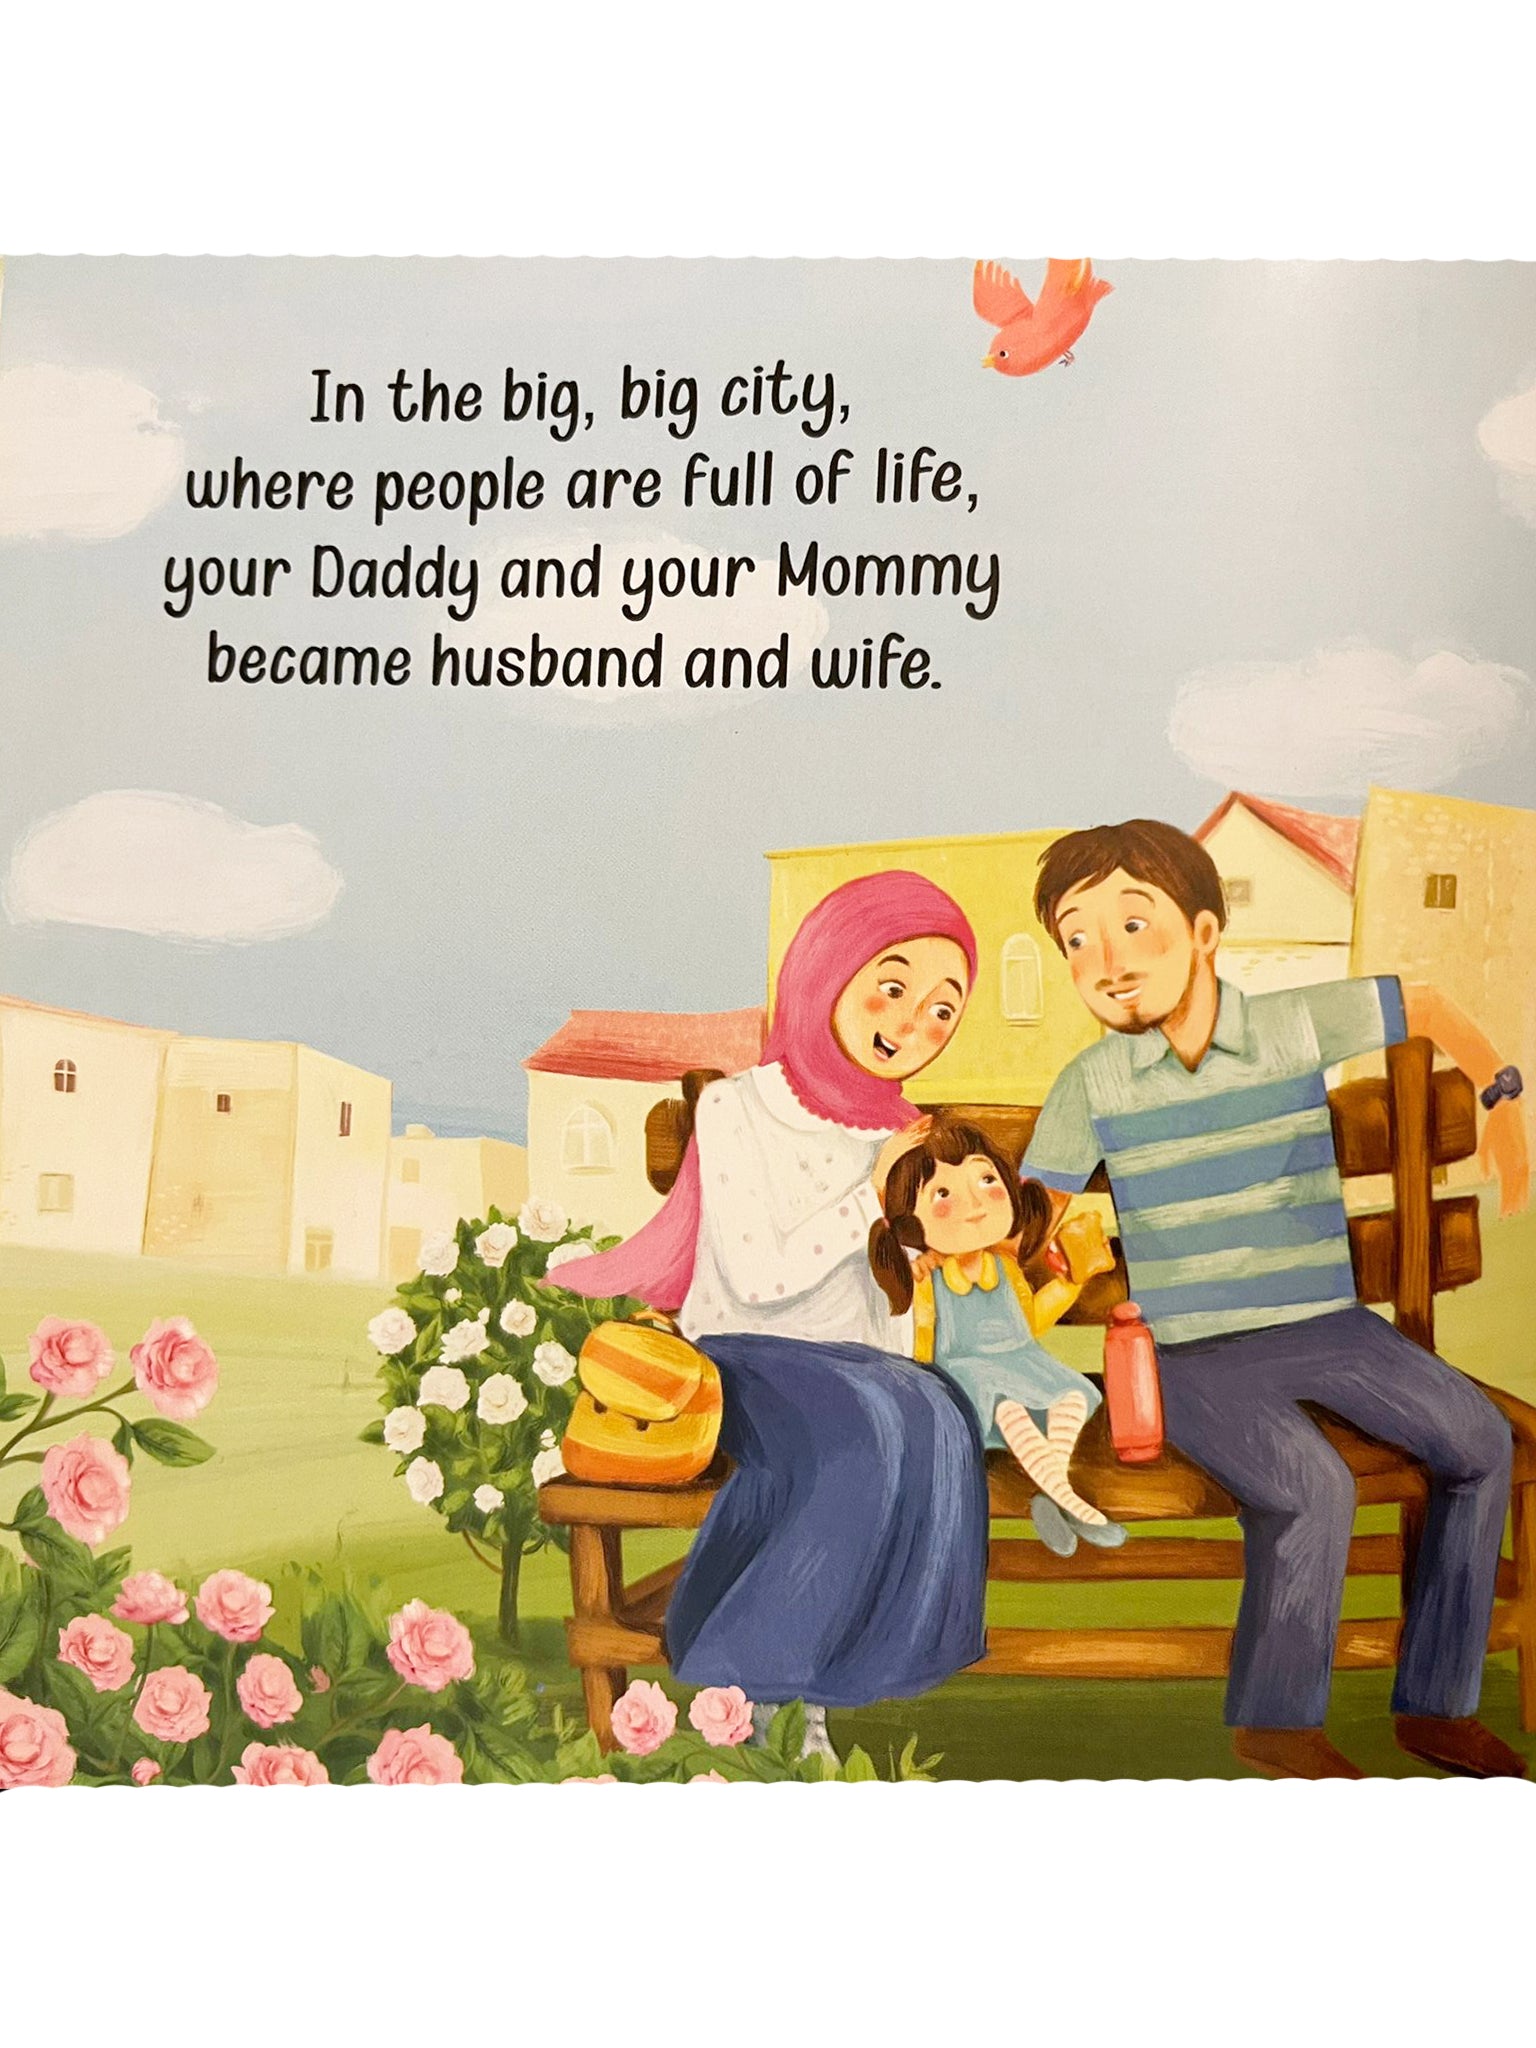 We All Have a Family - Kids Story by the Palestinian Author - Amanie Abu-Lebdeh